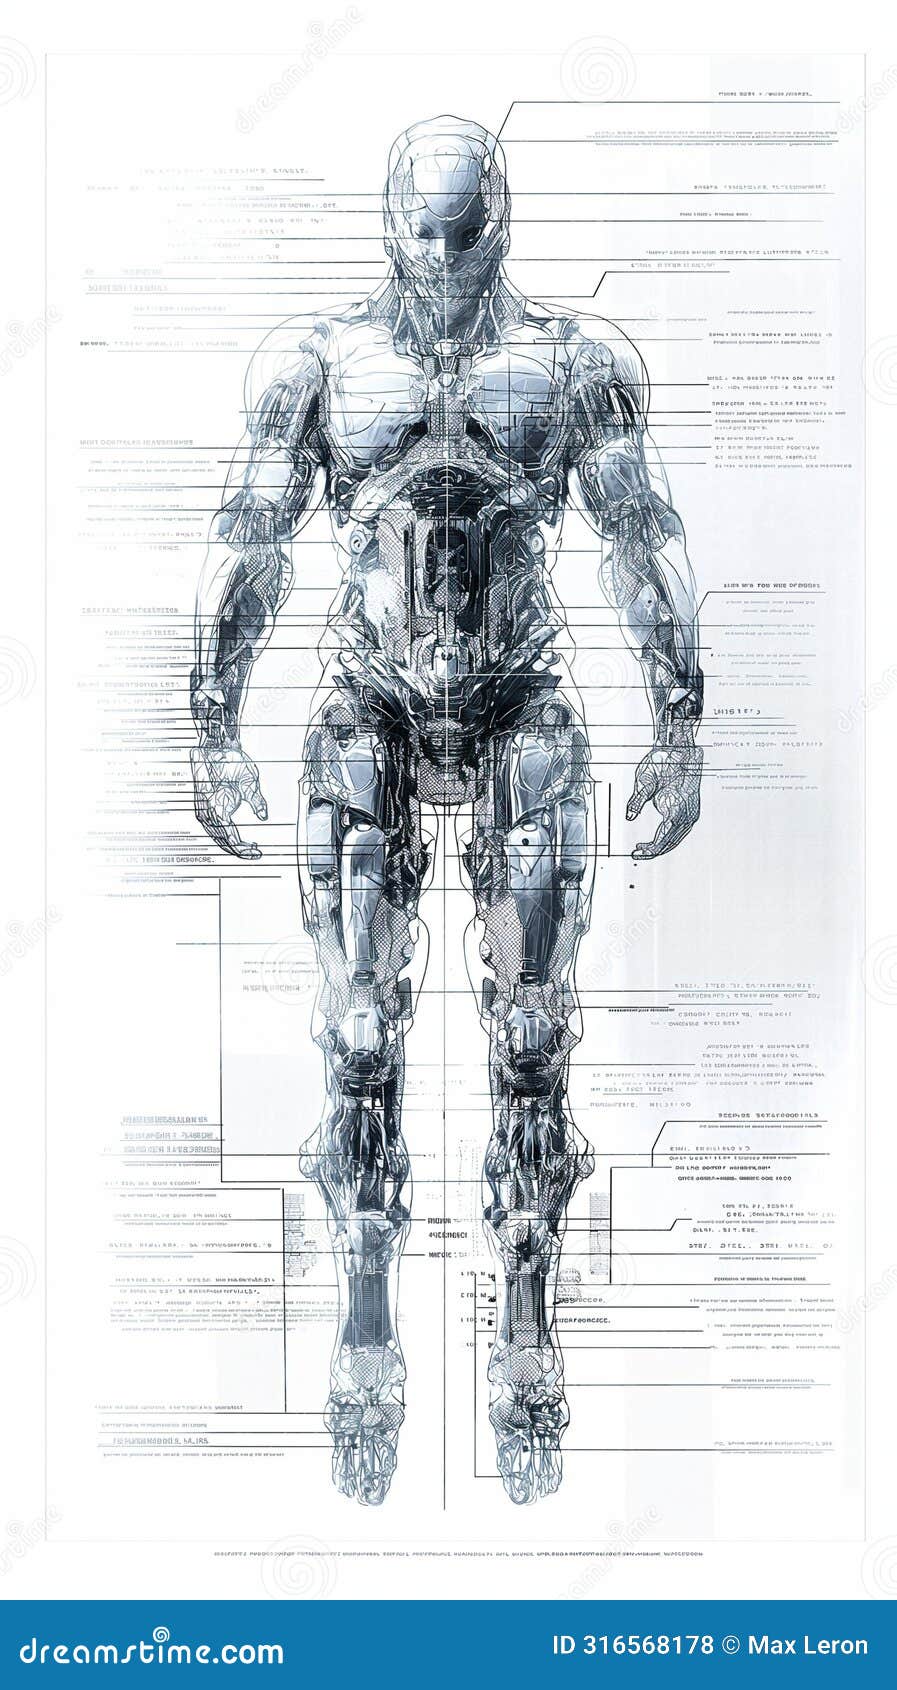 exoskeleton mobility suit for human front view military schematic diagrammatic drawing blueprint